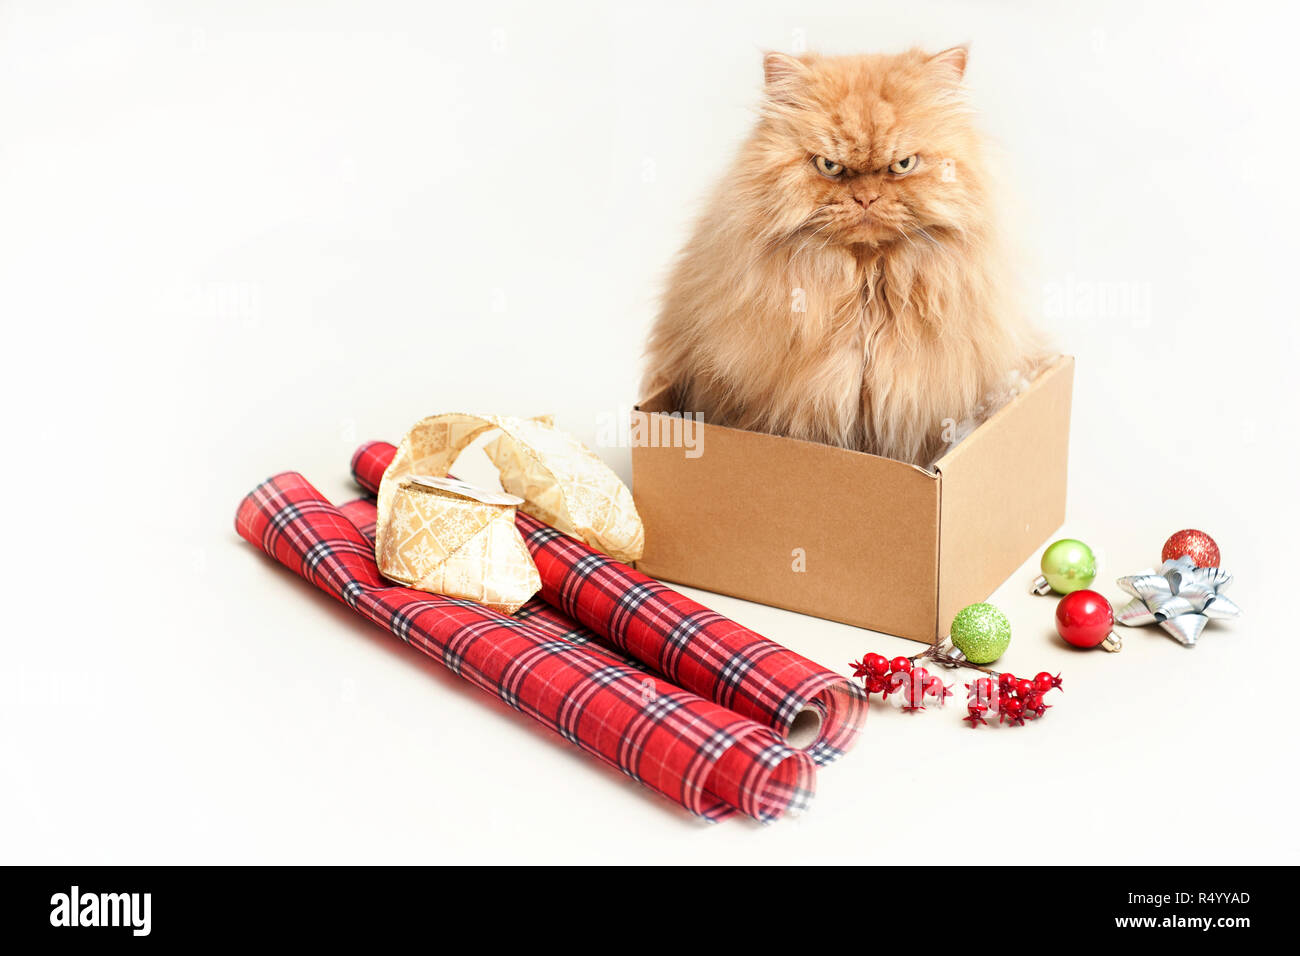 Long haired orange Persian cat  sitting in tiny box with ornaments and wrapping paper Stock Photo